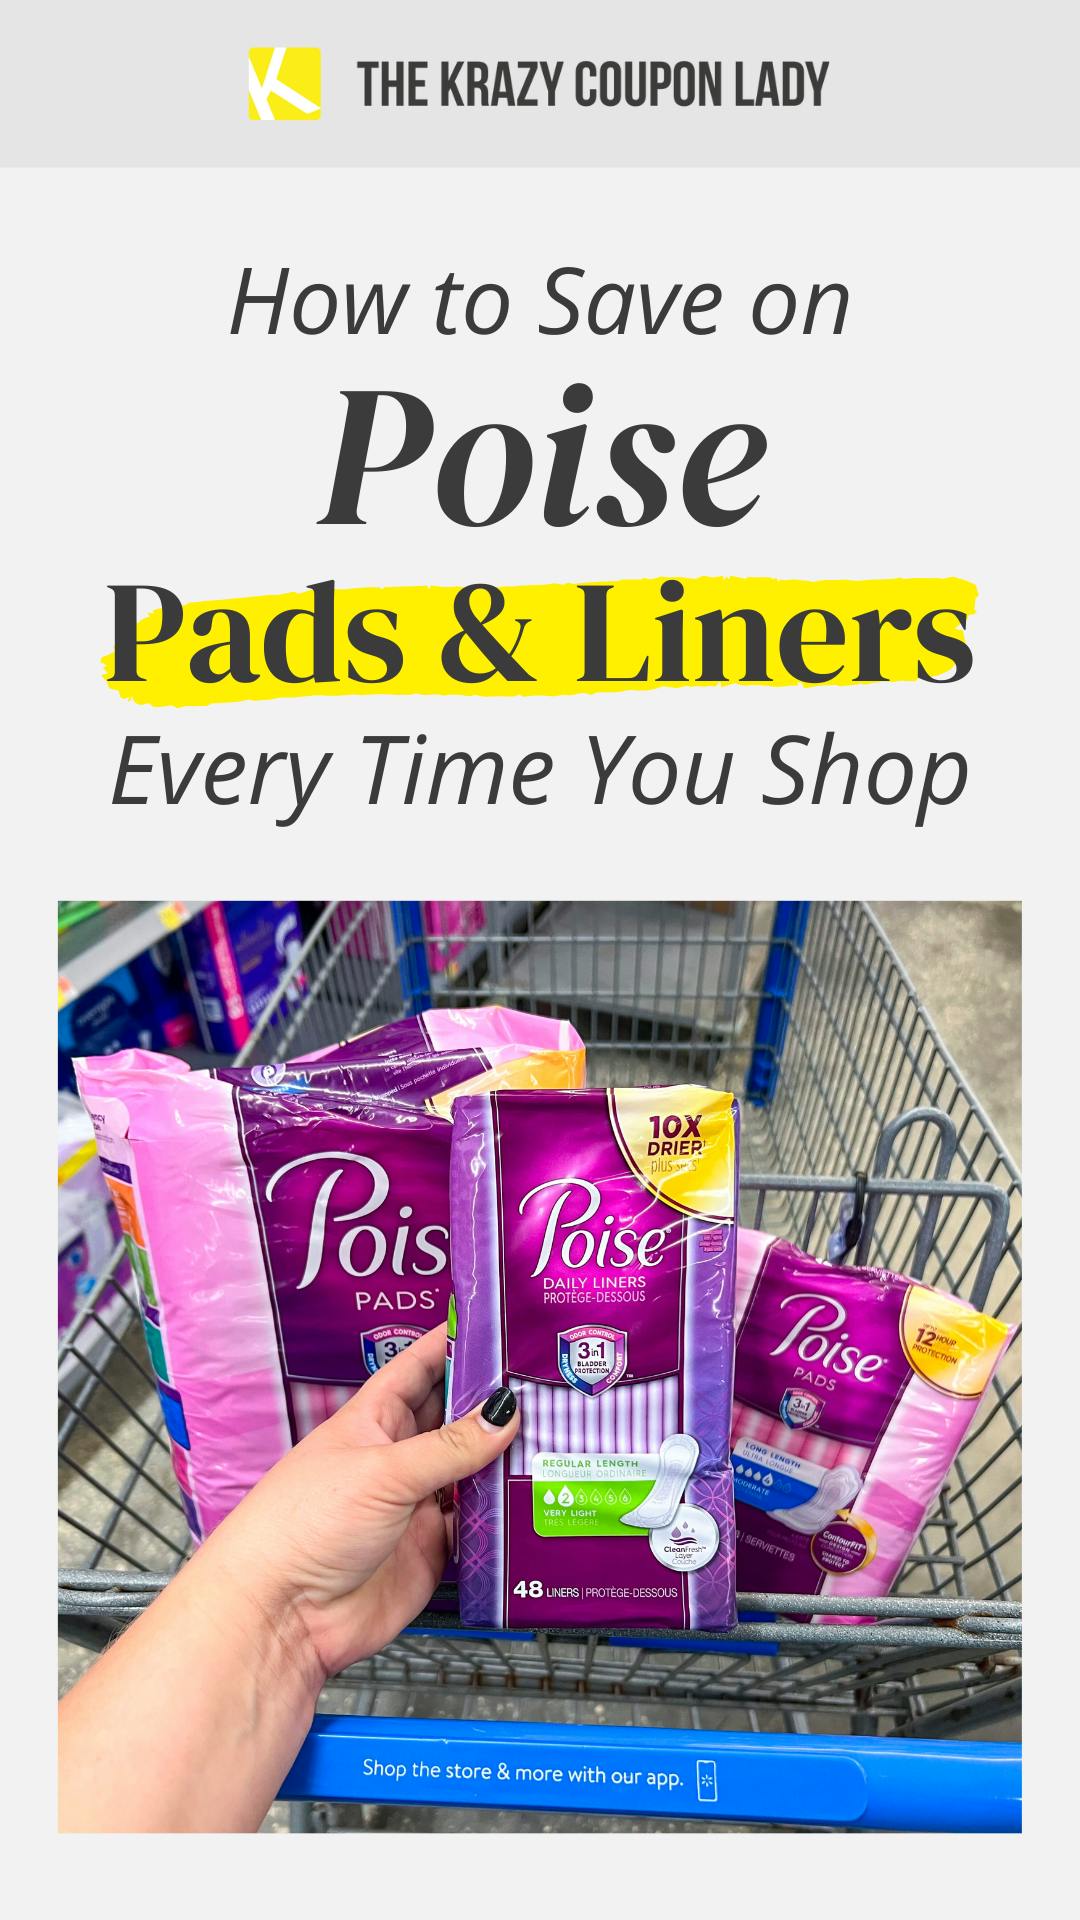 How to Save on Poise Pads & Liners Every Time You Shop